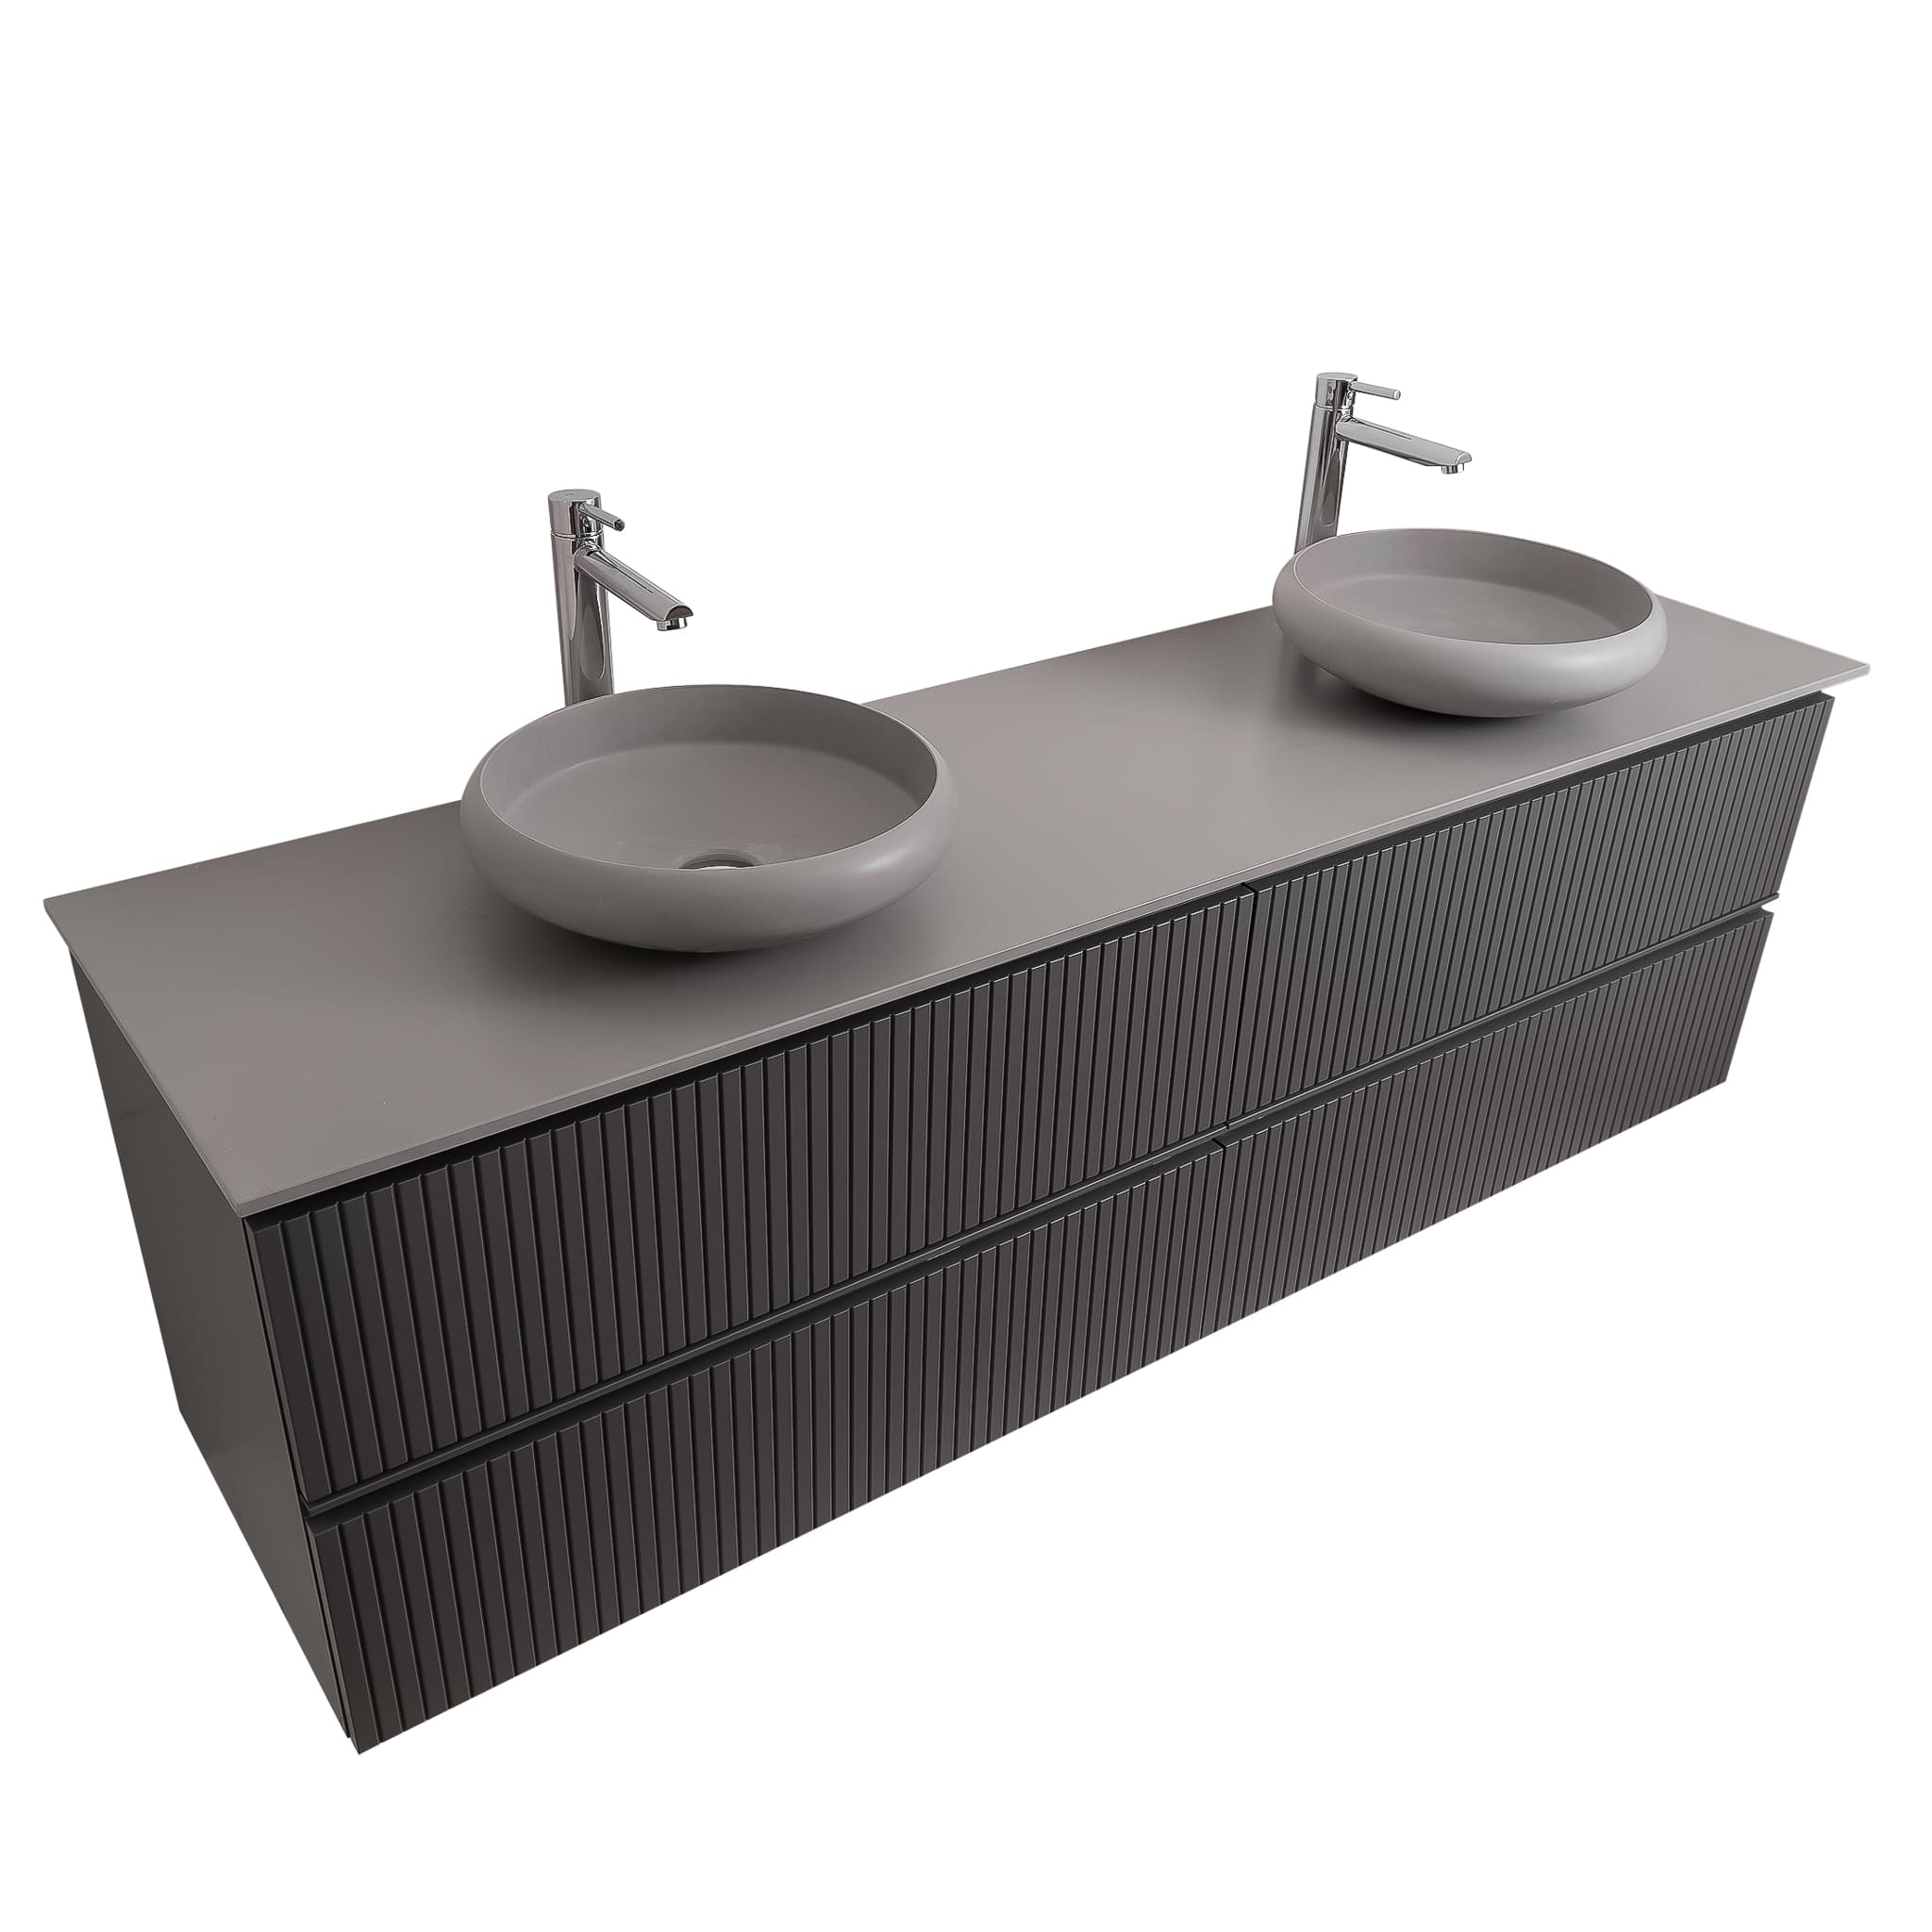 Ares 63 Matte Grey Cabinet, Solid Surface Flat Grey Counter And Two Round Solid Surface Grey Basin 1153, Wall Mounted Modern Vanity Set